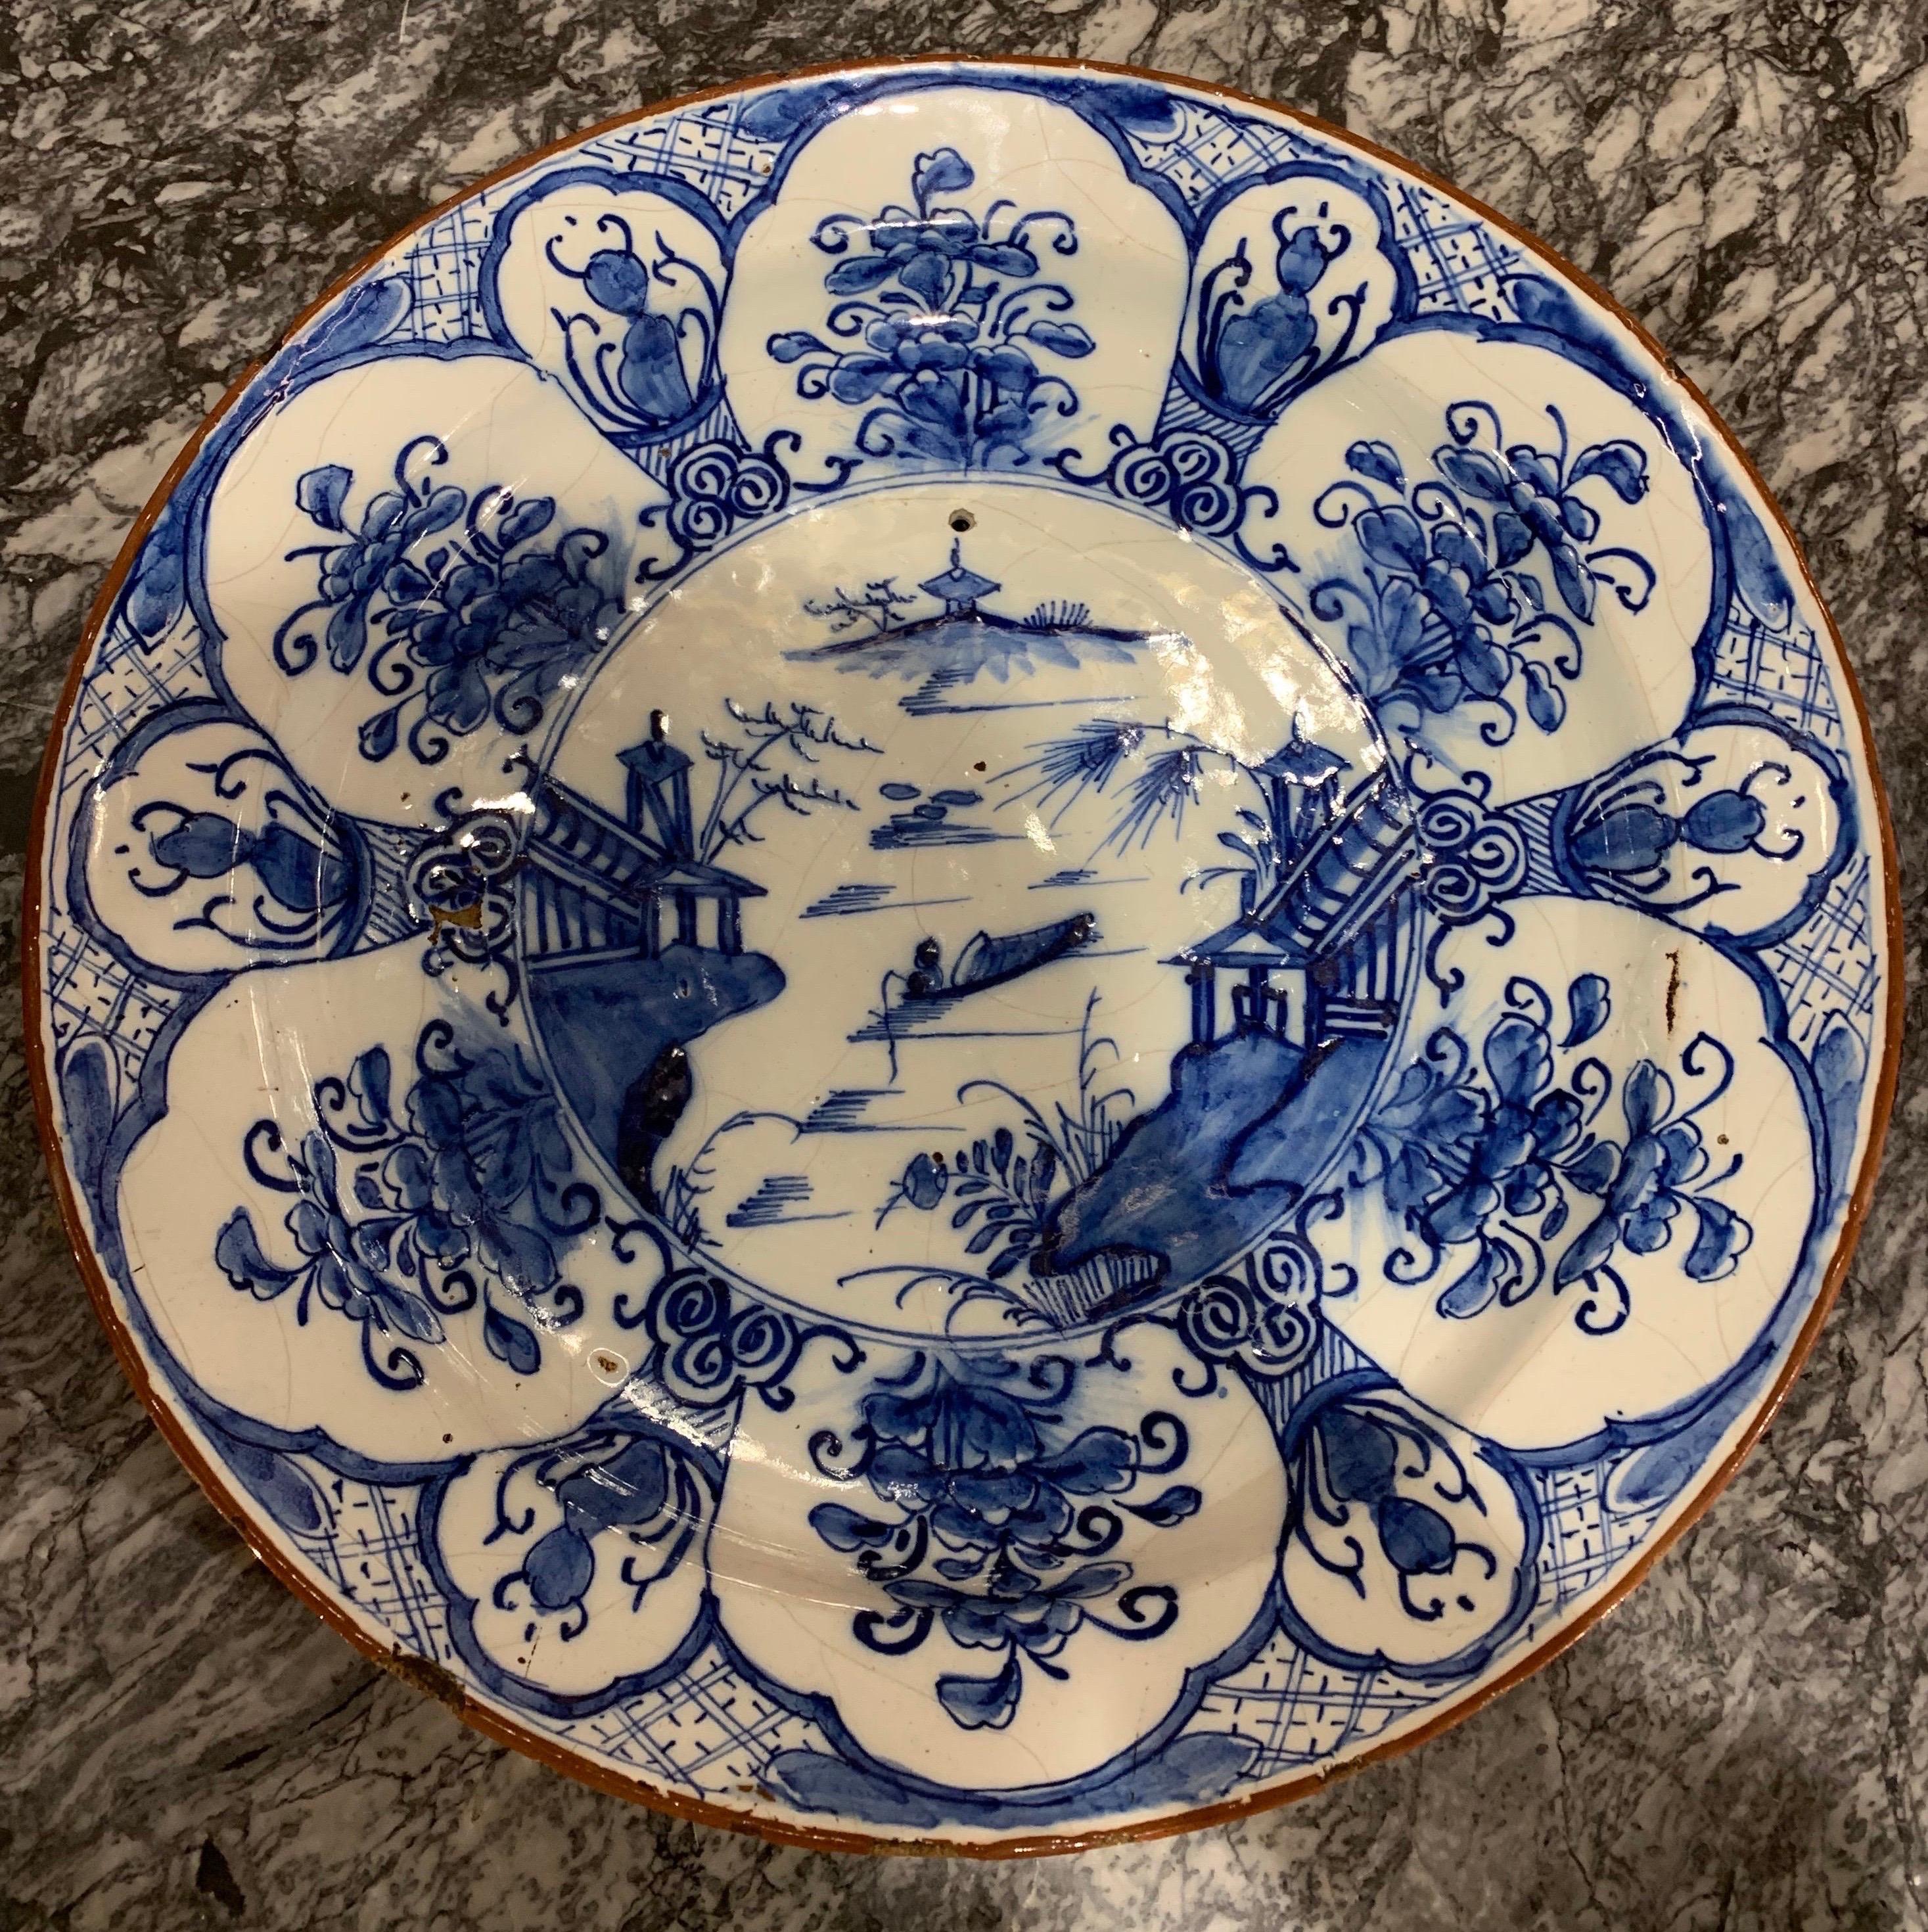 Great 18th century hand painted Dutch delft chinoiserie decorated platter. 13.25” diameter. Hole drilled for wall mounting.